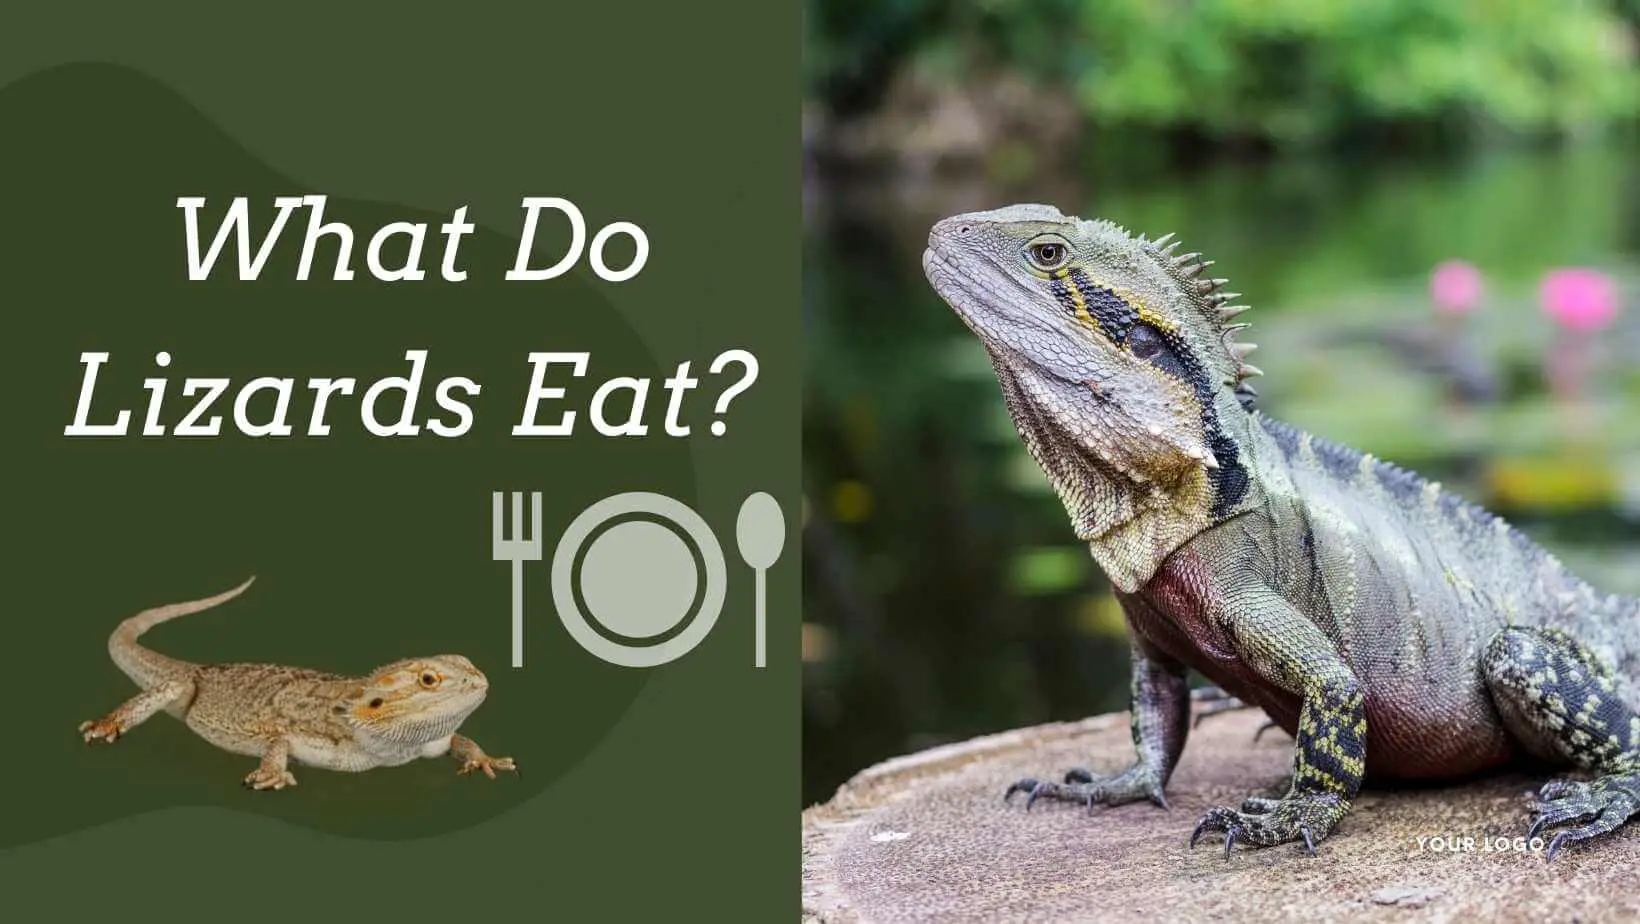 What Do Lizards Eat?